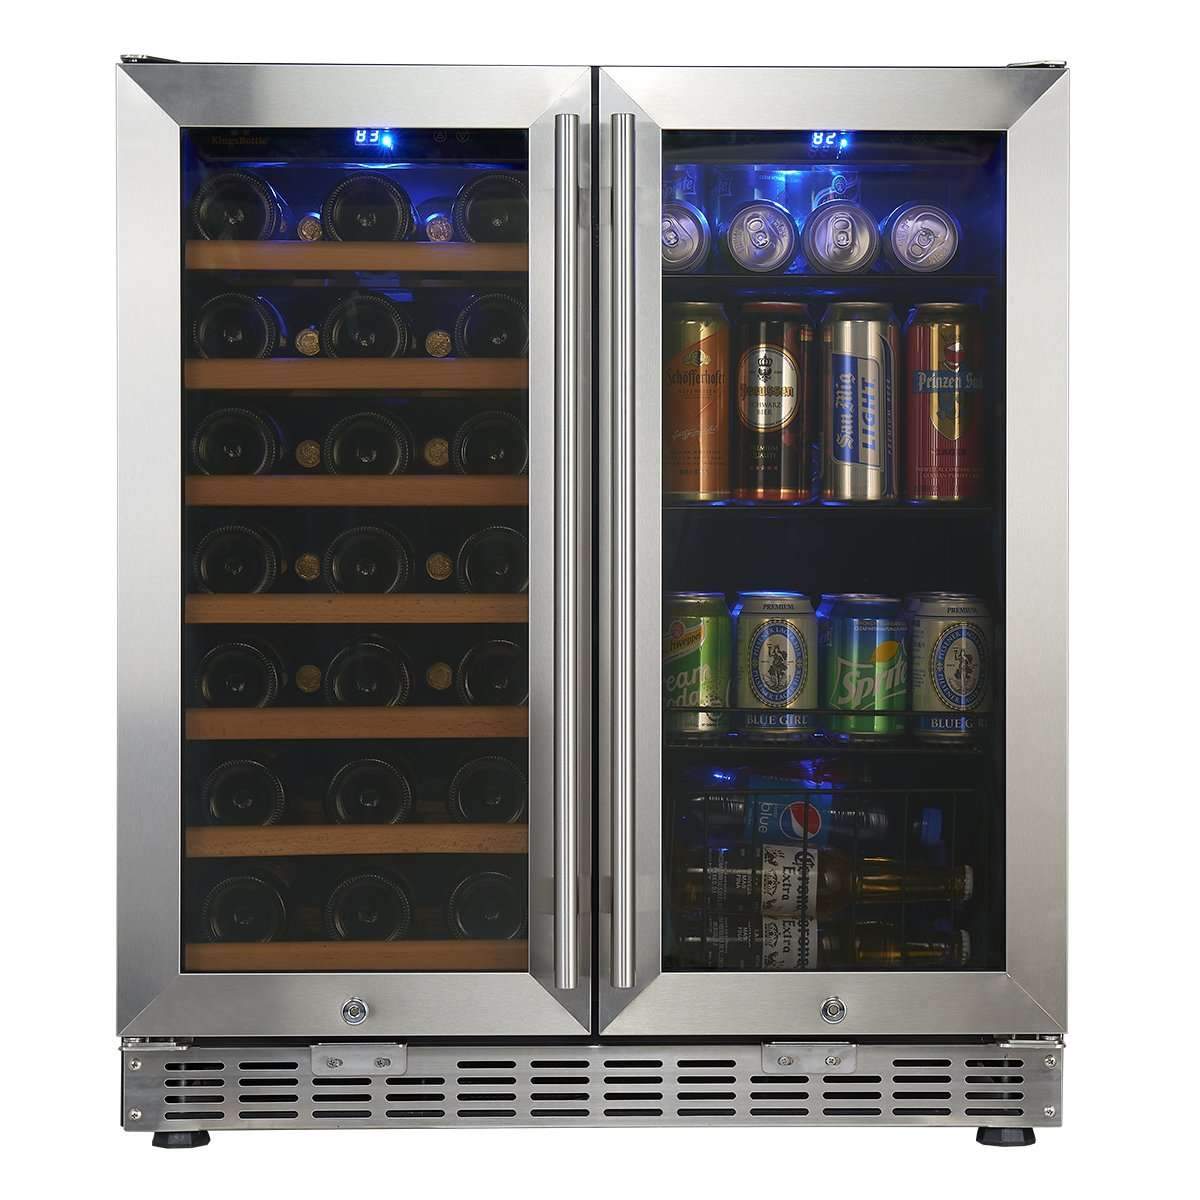 Kingsbottle - 30" Dual Zone Undercounter Wine and Beverage Center with Low-E Glass French Door, Black Frame/Stainless Steel Trim (KBUSF66BW) Wine & Beverage Center KingsBottle Glass Door with Stainless Steel Trim 2-Year Warranty (Free) 